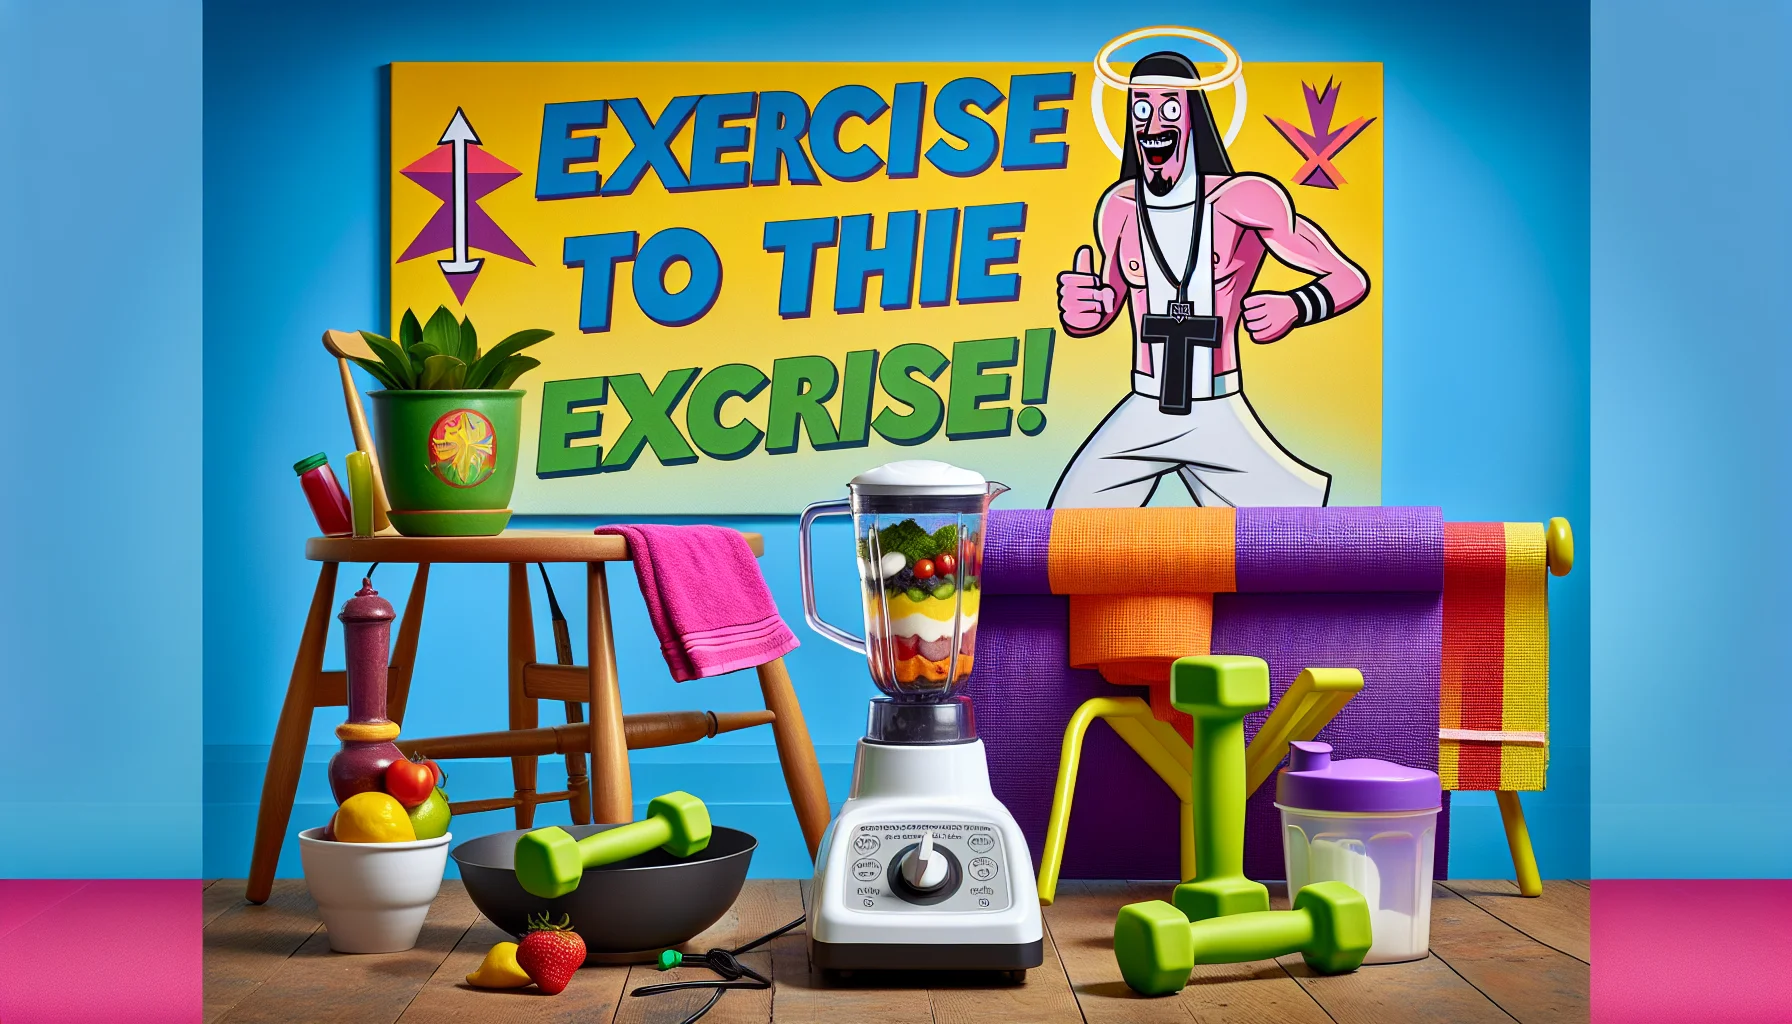 A humorous scenario emphasising fitness and wellness using a symbolic mix of holy ingredients, tailored to fitness enthusiasts. The scene involves various kitchen items, signifying different elements associated with workouts and good health. One can see a blender filled with symbolic holy ingredients, next to a pair of dumbbells and a striking bright yoga mat. A playful caricature of a high-spirited person, a Caucasian man with a strong build, doing a fun, exaggerated exercise pose, is there, amplifying the cheerful tone. There's a catchy fitness slogan, which reads, 'Exercise to the exorcise!' dominating the image, making it more enticing for people to exercise.